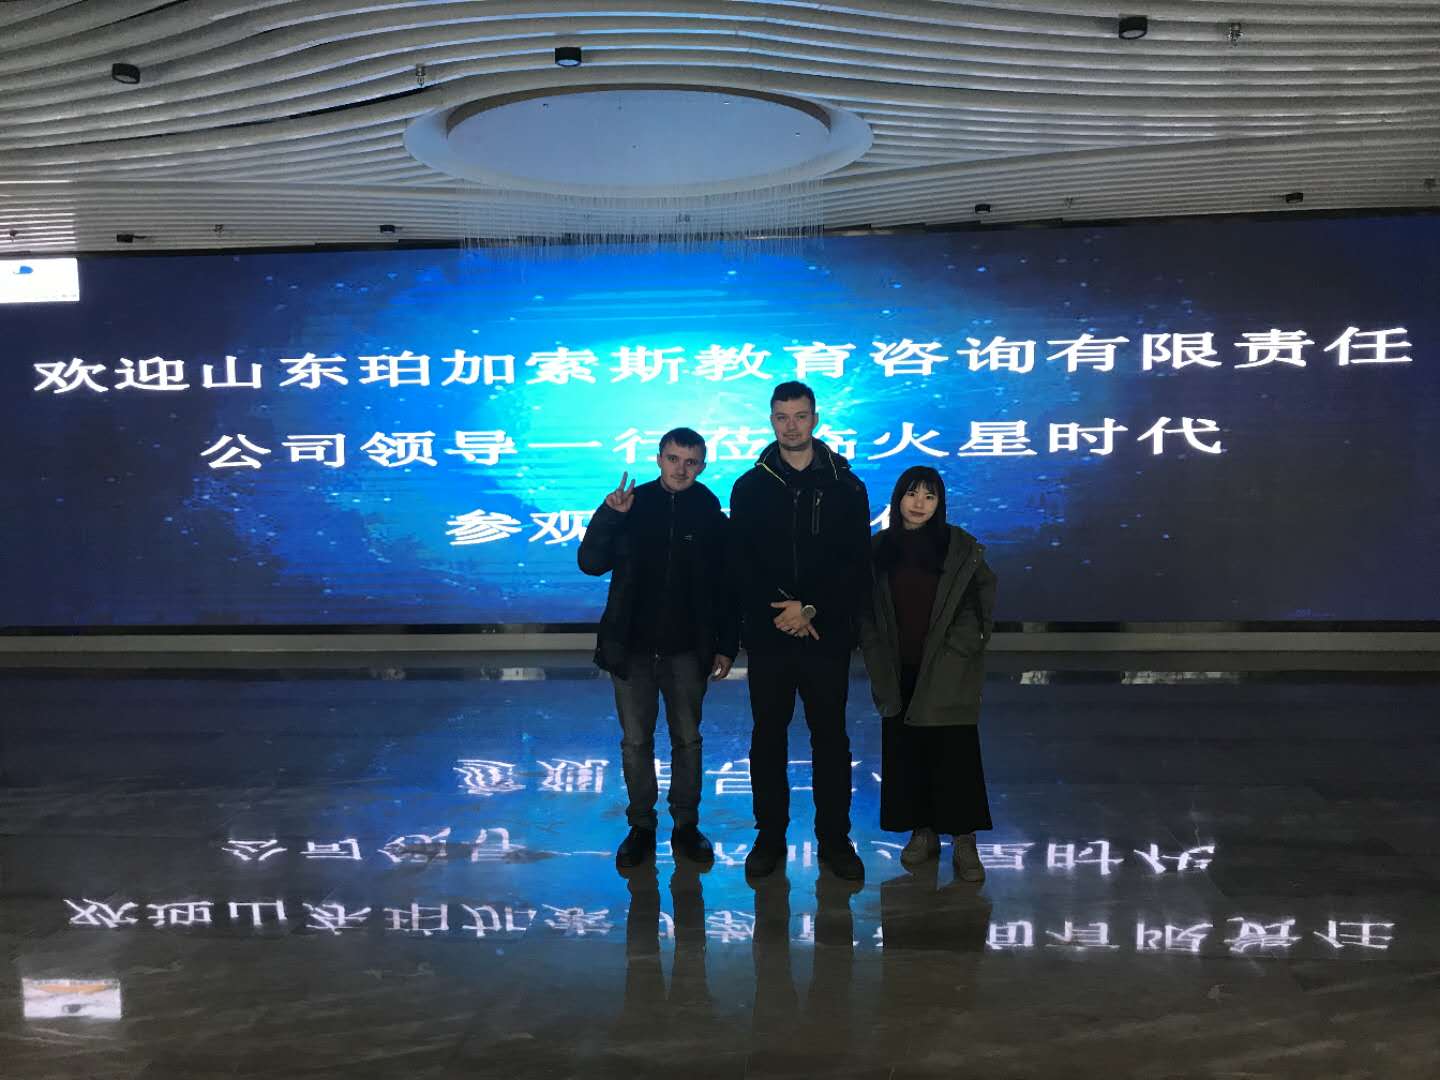 Paying a visit to the "Mars Age" Research Tourism Base in Bozhou Province